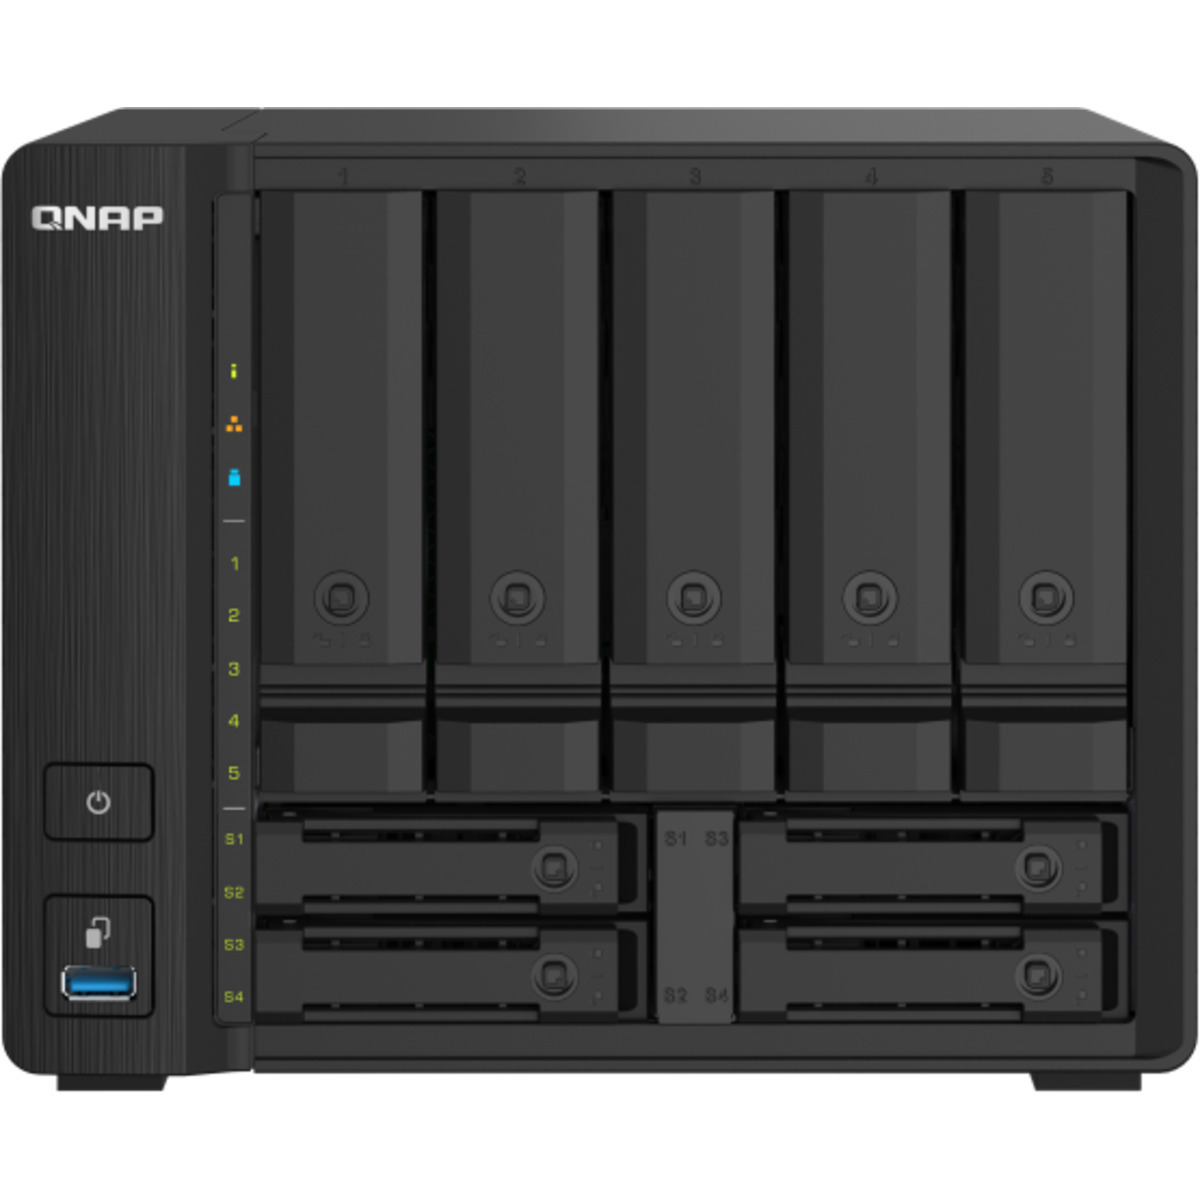 QNAP TS-932PX 10tb 5+4-Bay Desktop Multimedia / Power User / Business NAS - Network Attached Storage Device 5x2tb Crucial MX500 CT2000MX500SSD1 2.5 560/510MB/s SATA 6Gb/s SSD CONSUMER Class Drives Installed - Burn-In Tested - FREE RAM UPGRADE TS-932PX